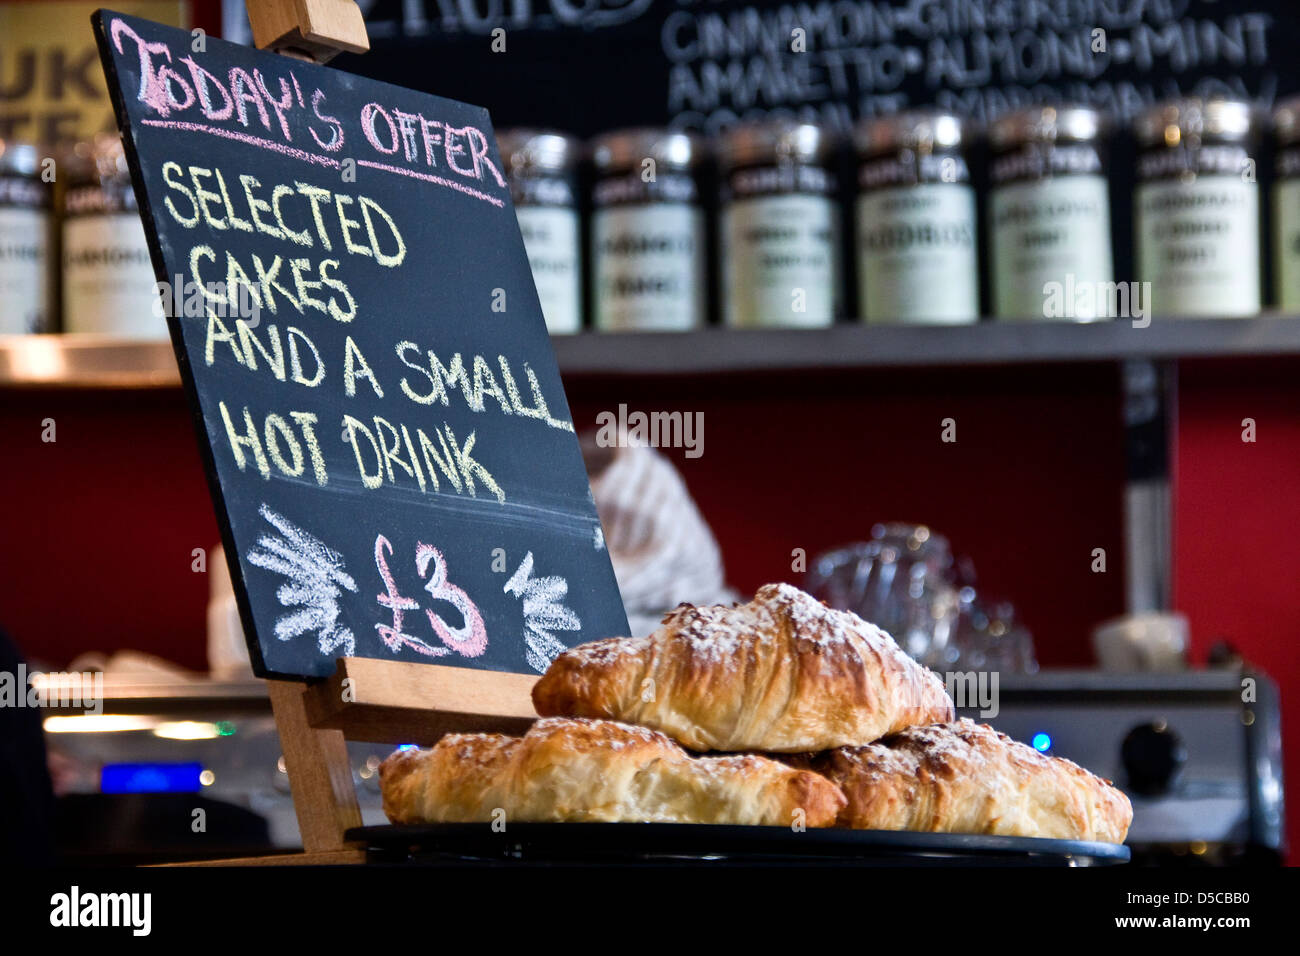 Selected cakes and a small hot drink for £3 is a special offer displayed inside a local Coffee Shop in Dundee,UK Stock Photo